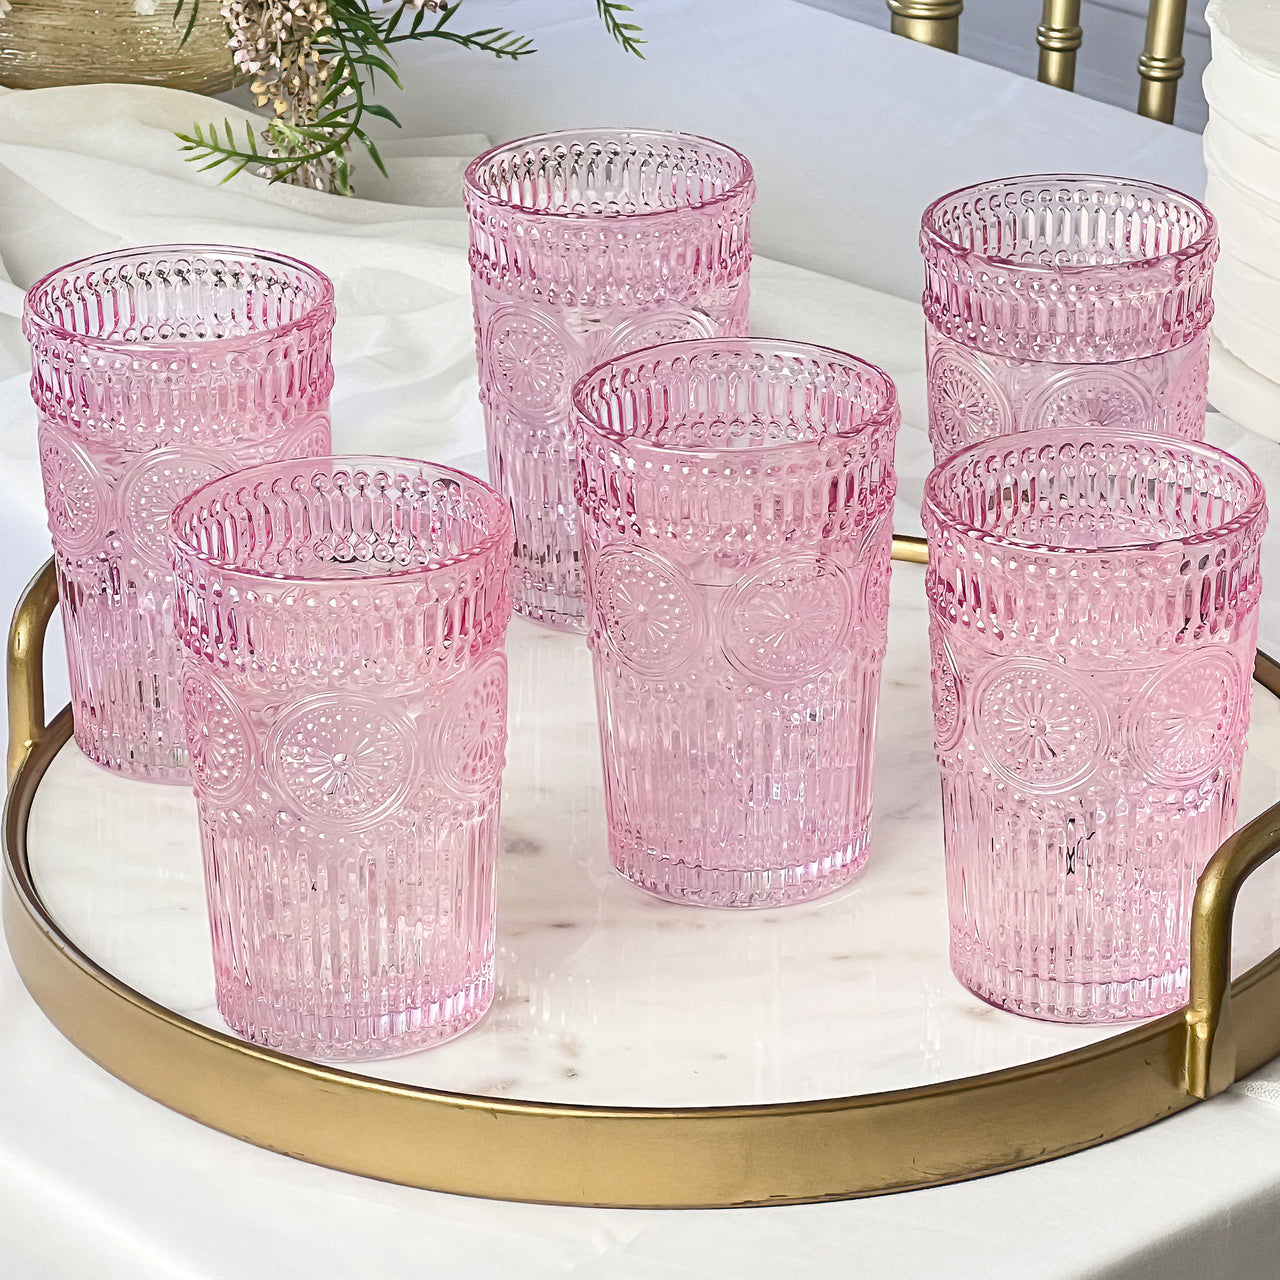 6 Pcs Cocktail Glass Pink Glasses Drinking Clear